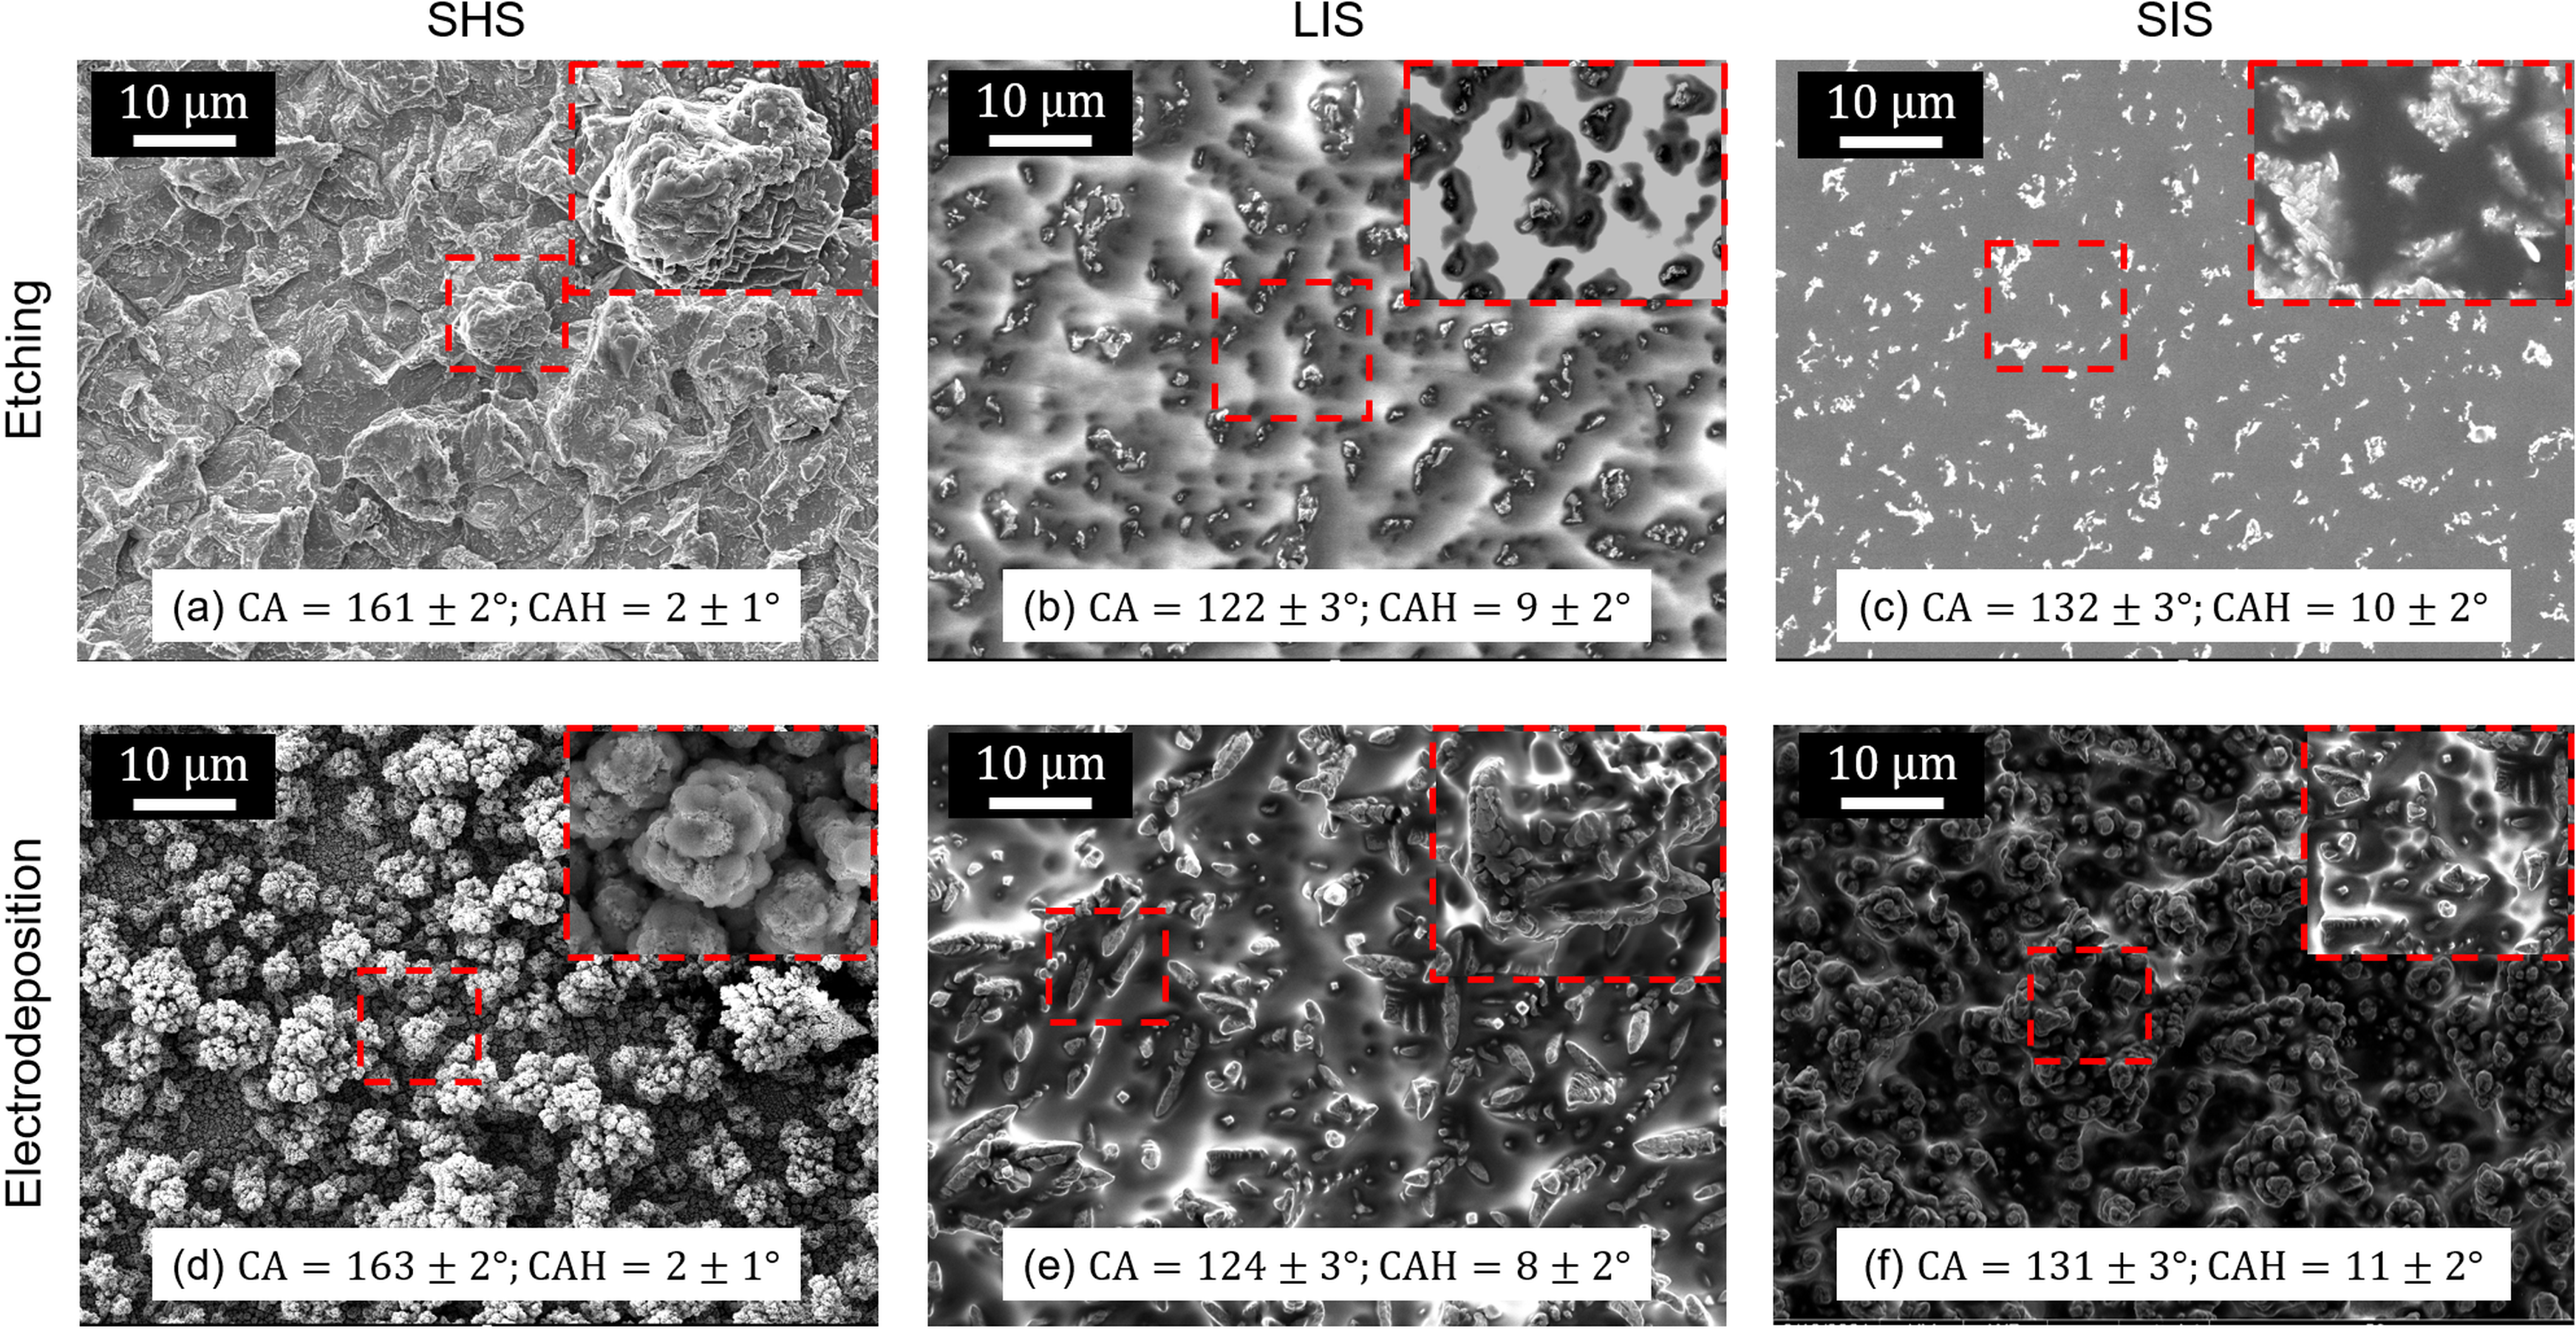 SEM images of
chemically etched (a) SHS, (b) LIS, and (c) SIS, and electrodeposited (d)
SHS, (e) LIS, and (f) SIS. All micrographs are captured using
backscattered electron detector in SEM [Reproduced with permission from Hatte et al. (2023)]).